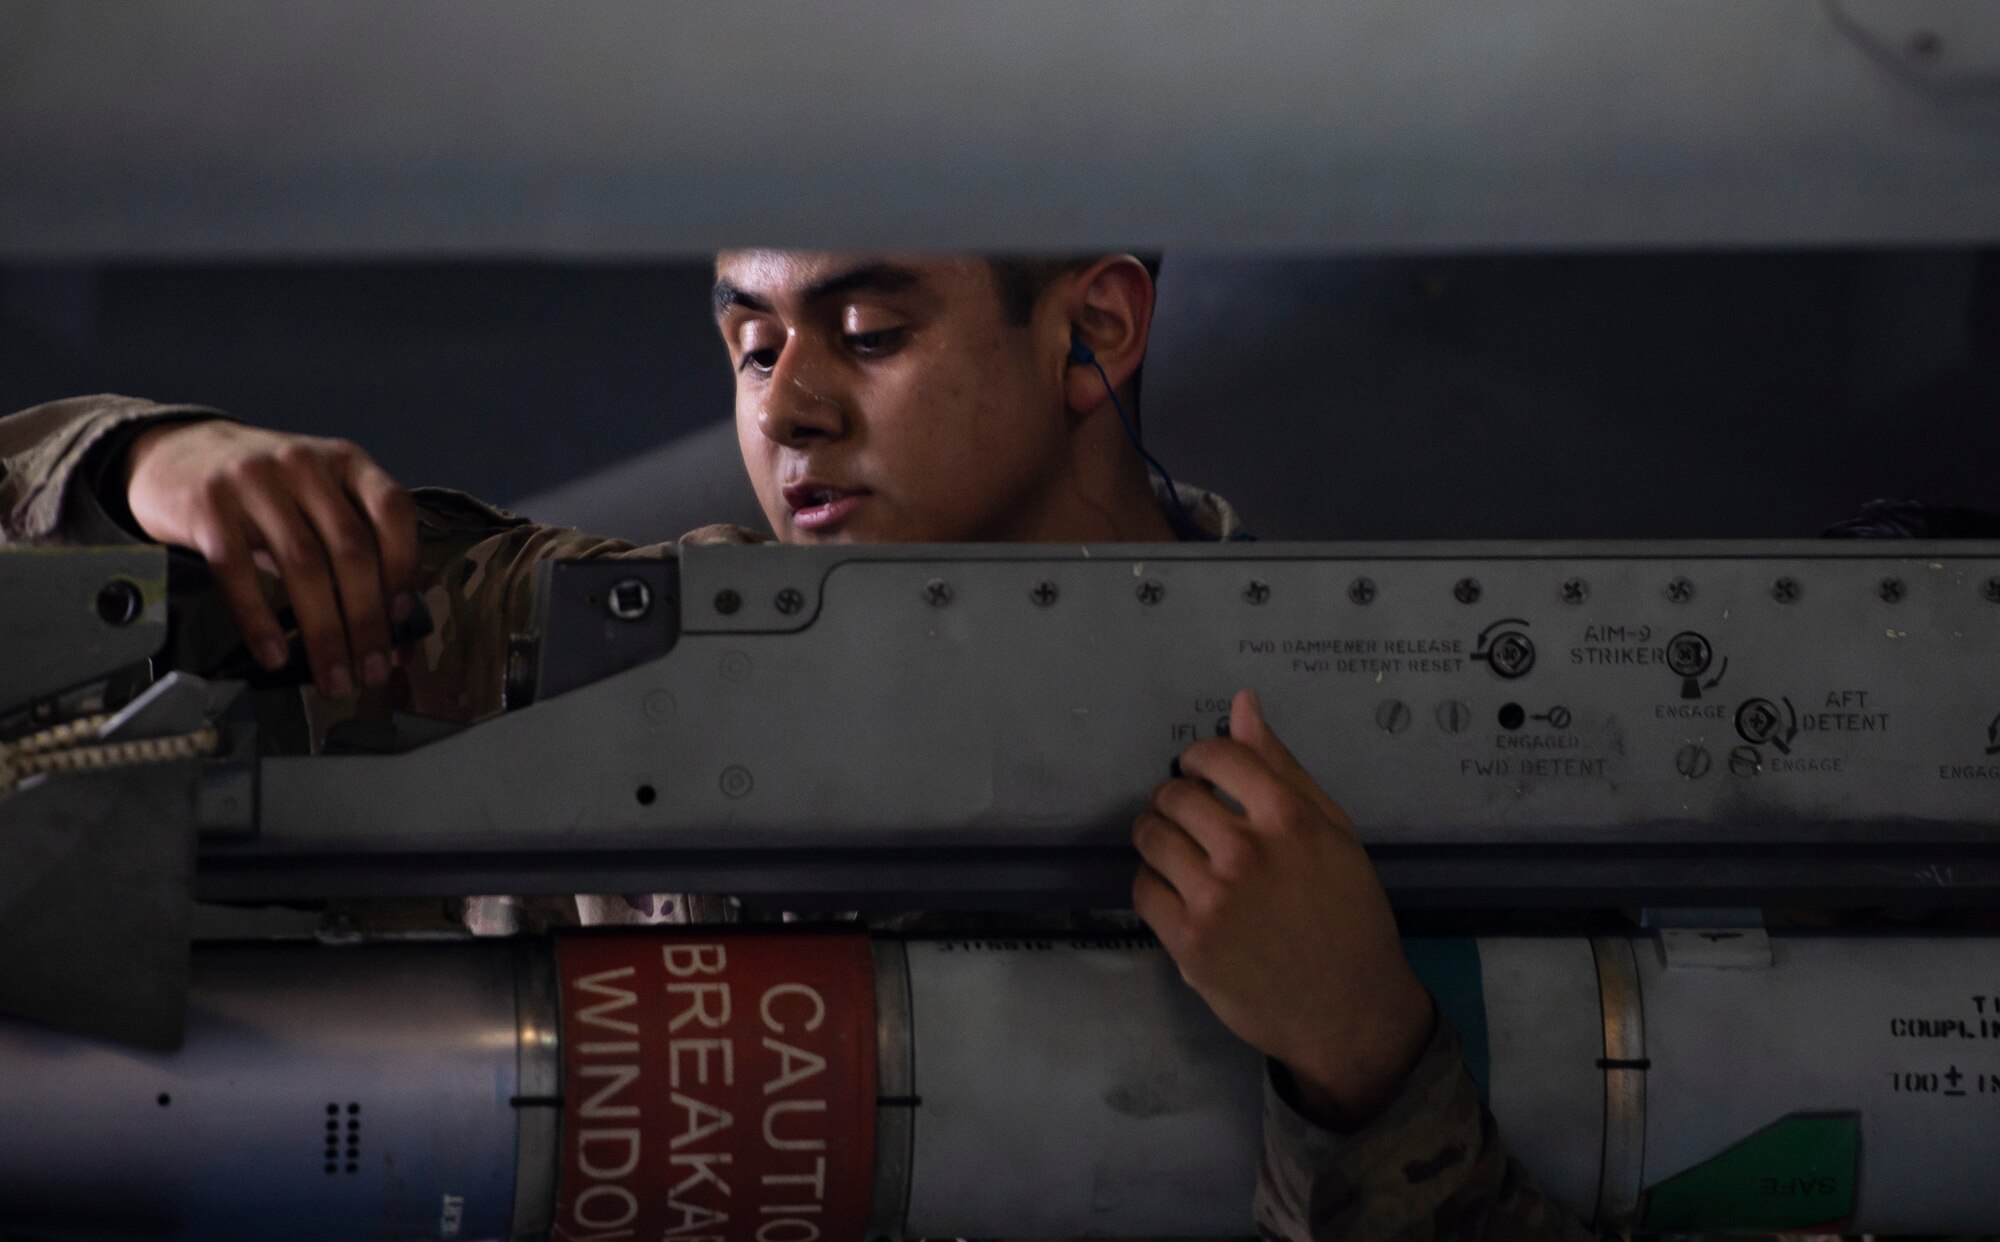 U.S. Air Force Airman 1st Class Daniel Nunez, 20th Aircraft Maintenance Squadron, 77th Aircraft Maintenance Unit load crew member, secures an AIM-9X Sidewinder on an F-16 Fighting Falcon during a Load Crew of the Year competition at Shaw Air Force Base, S.C., March 1, 2019.